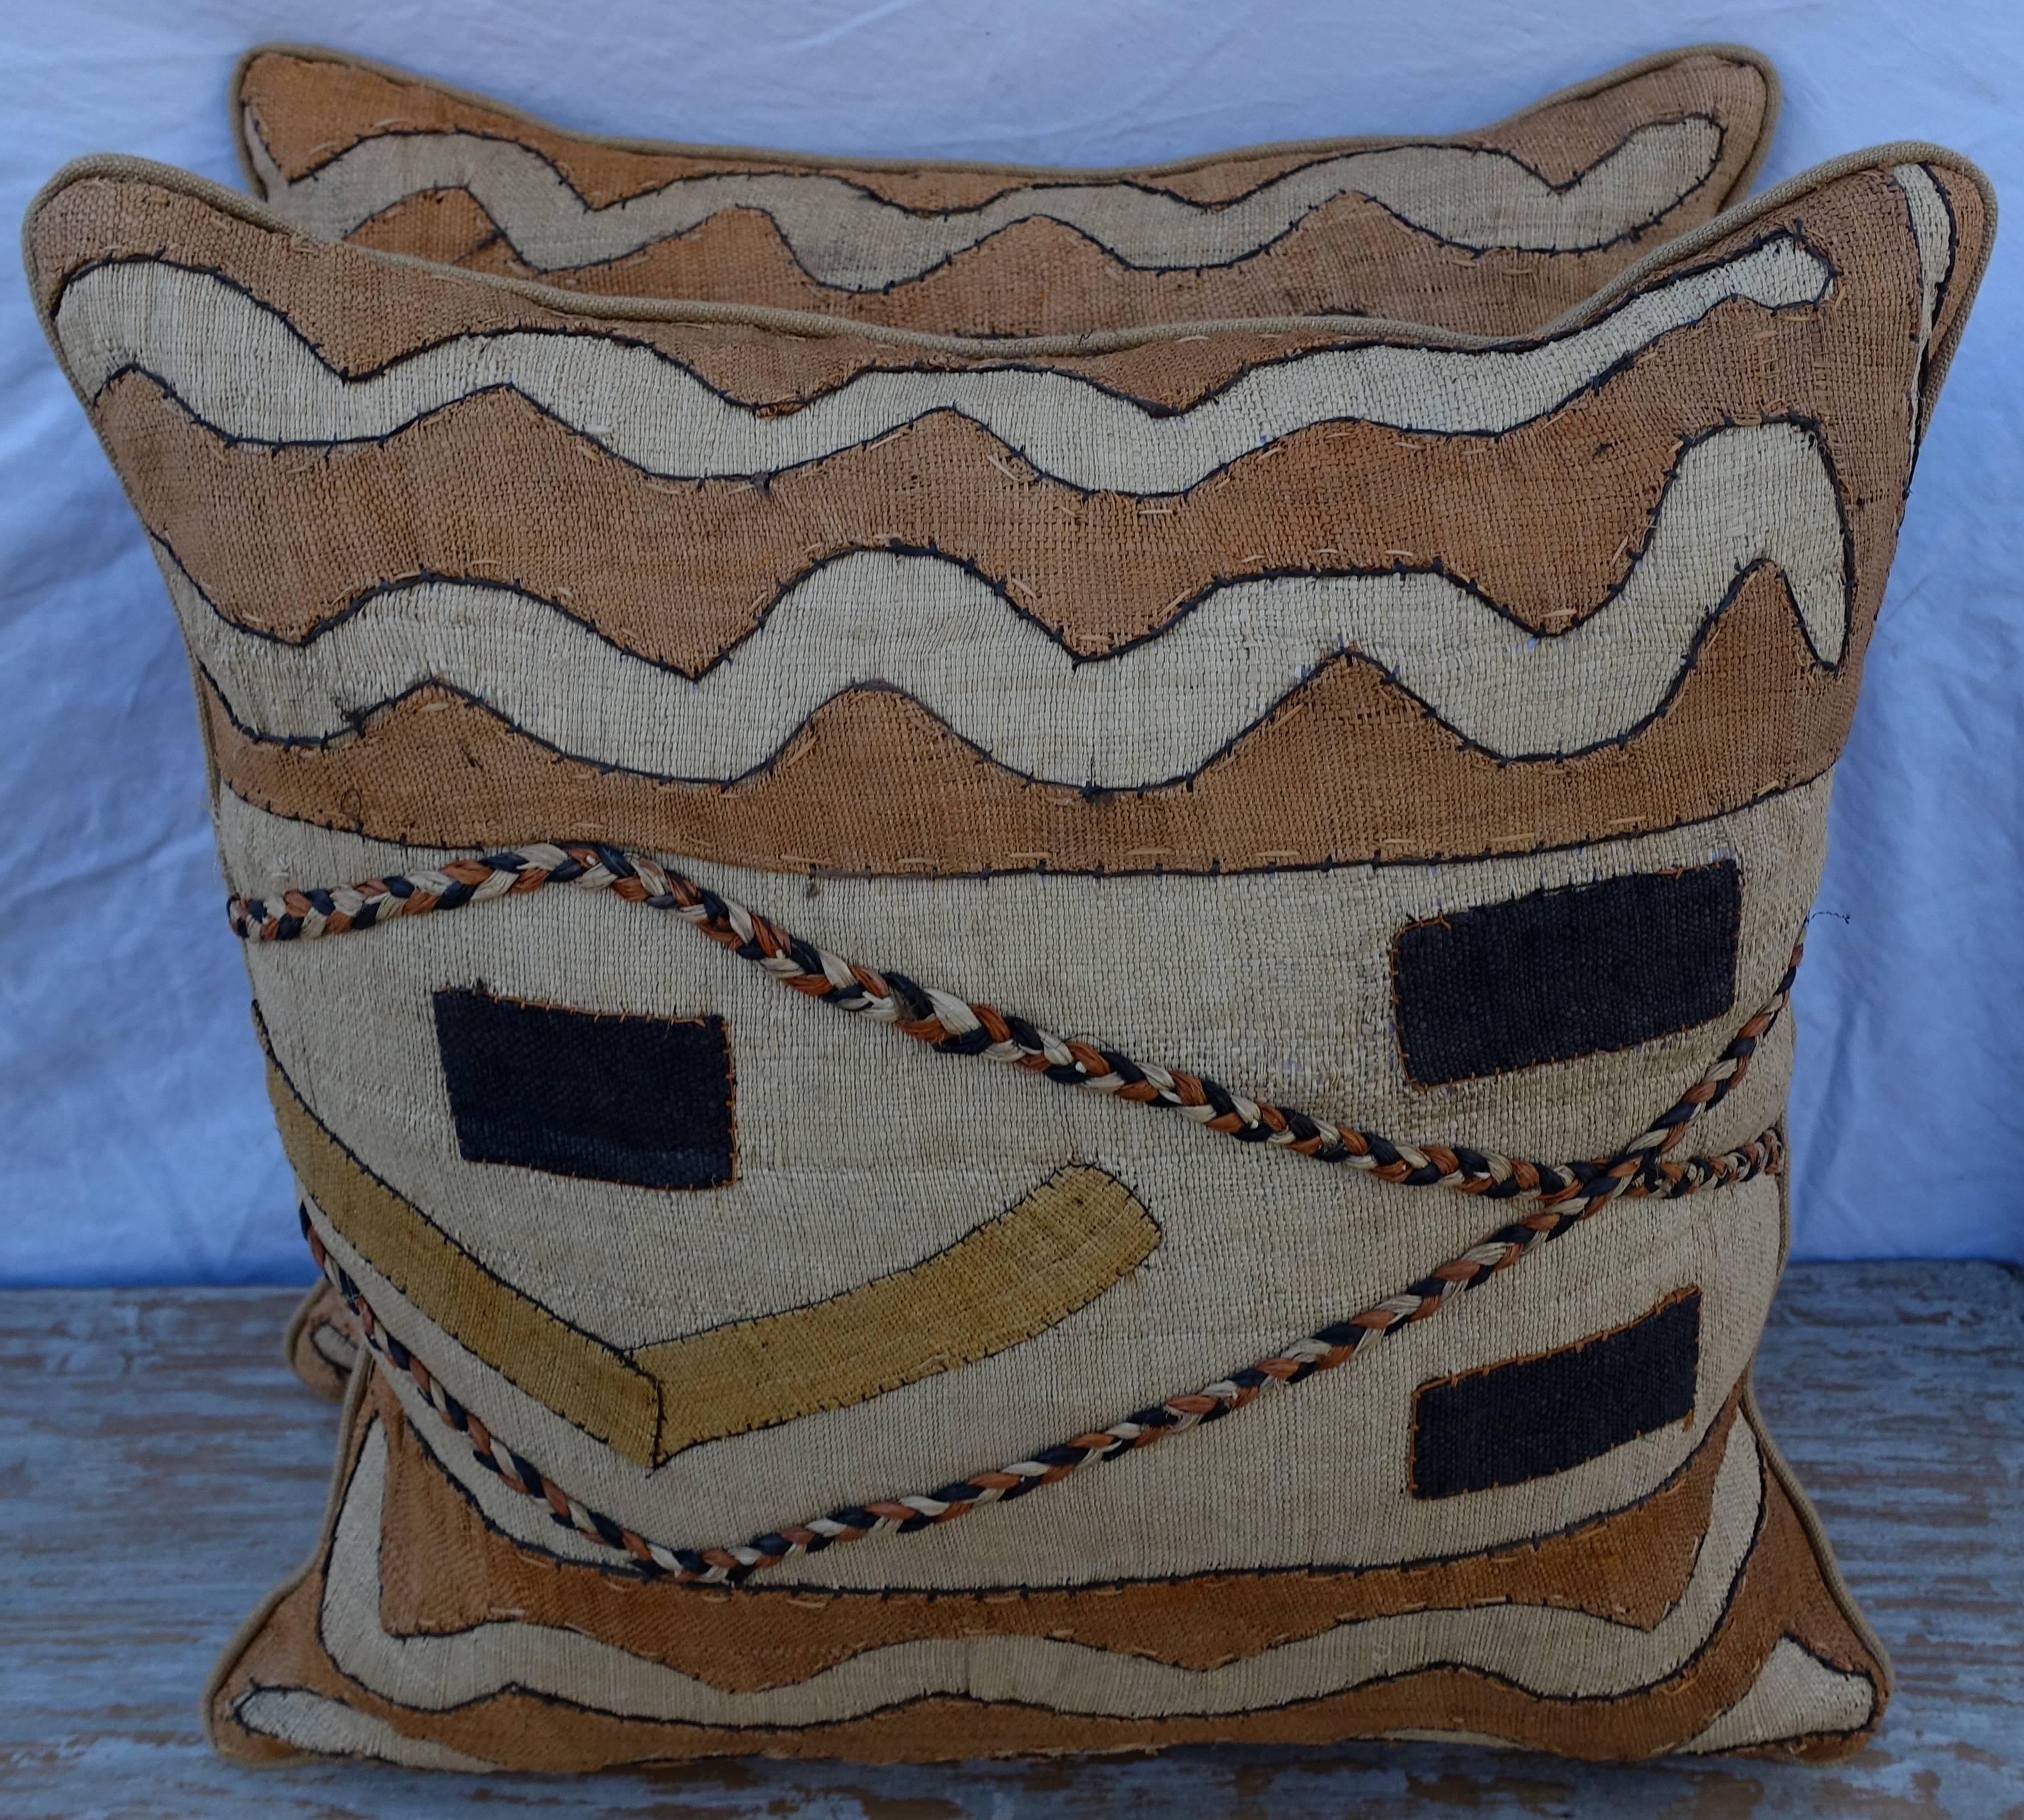 Pair of custom African Kuba cloth pillows made with woven raffia fronts and wheat colored linen backs. Self welt detail, sewn closed.